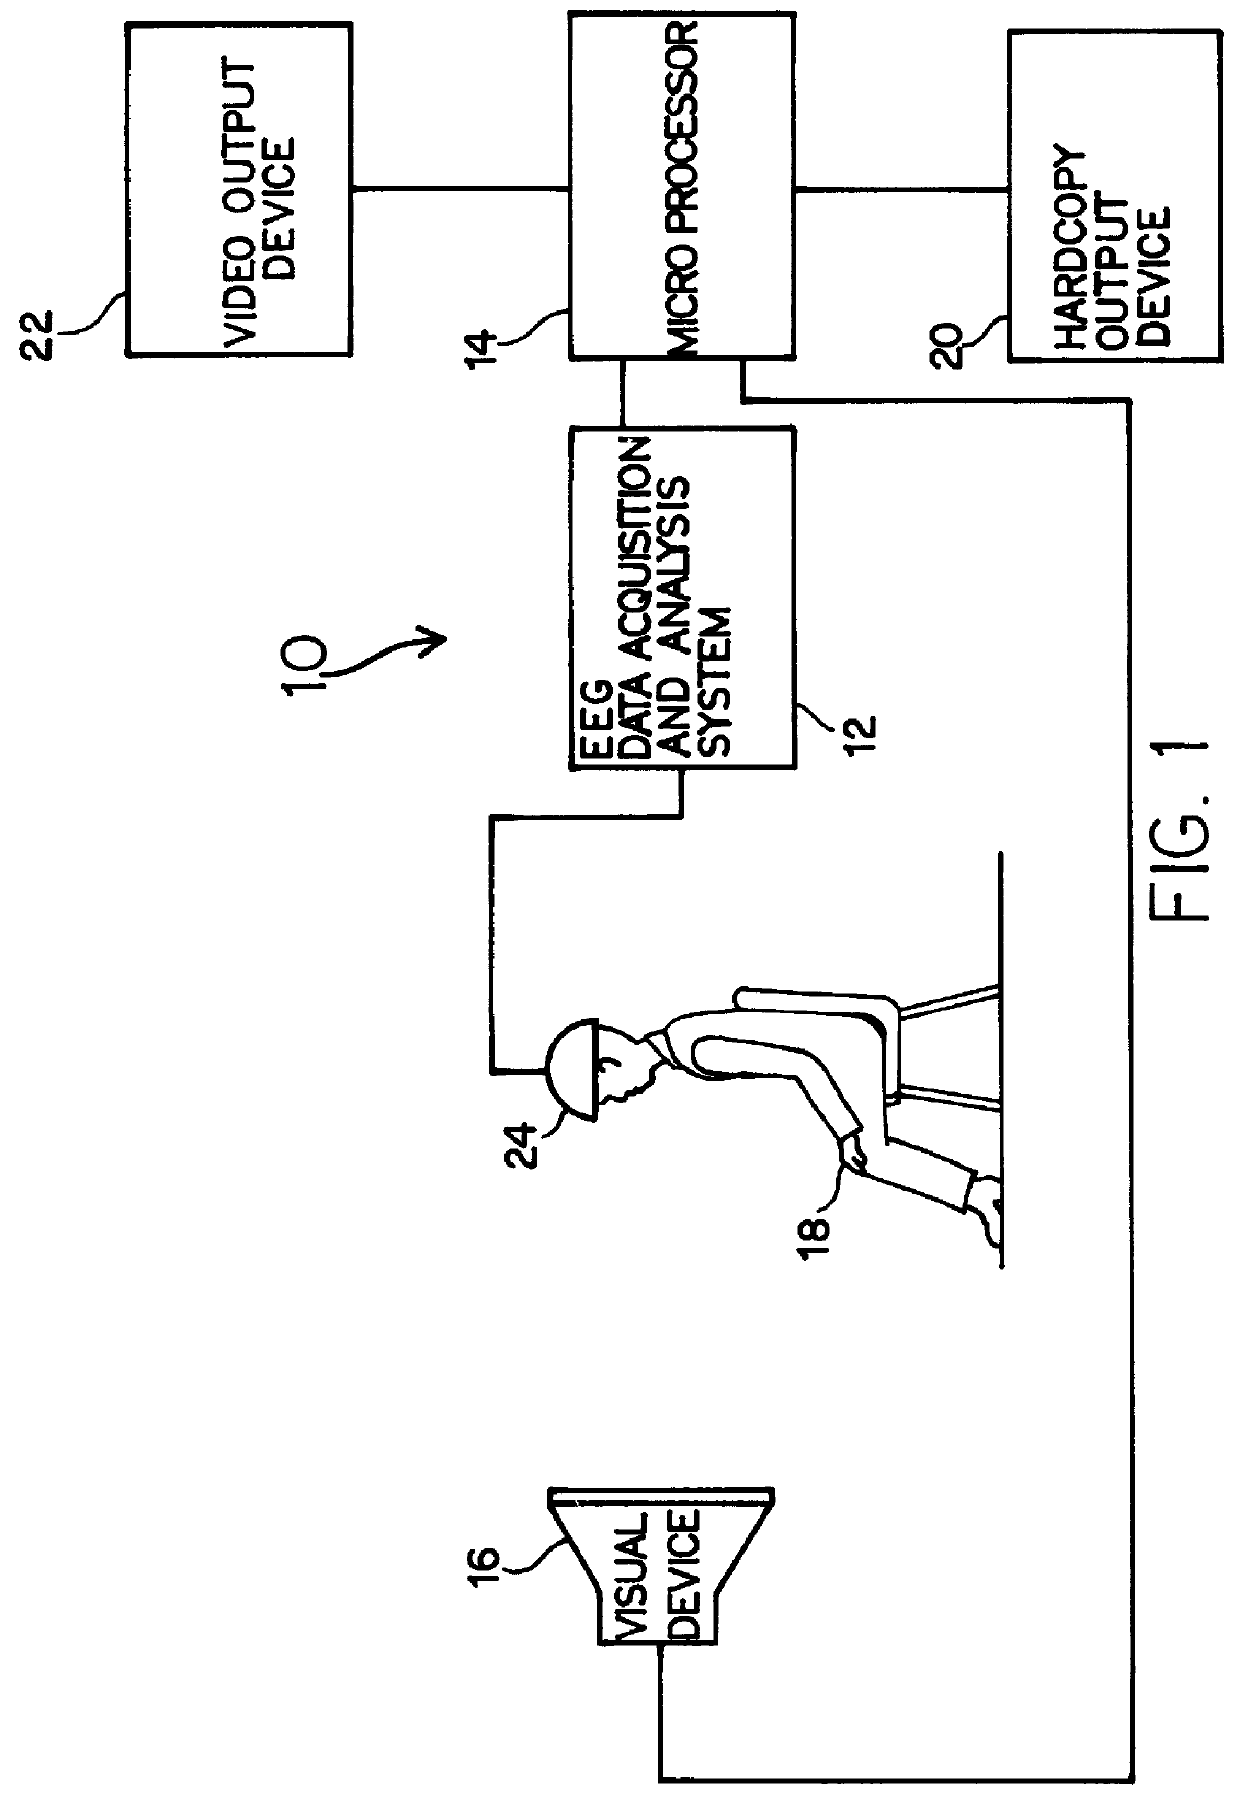 Apparatus and method for predicting probability of explosive behavior in people